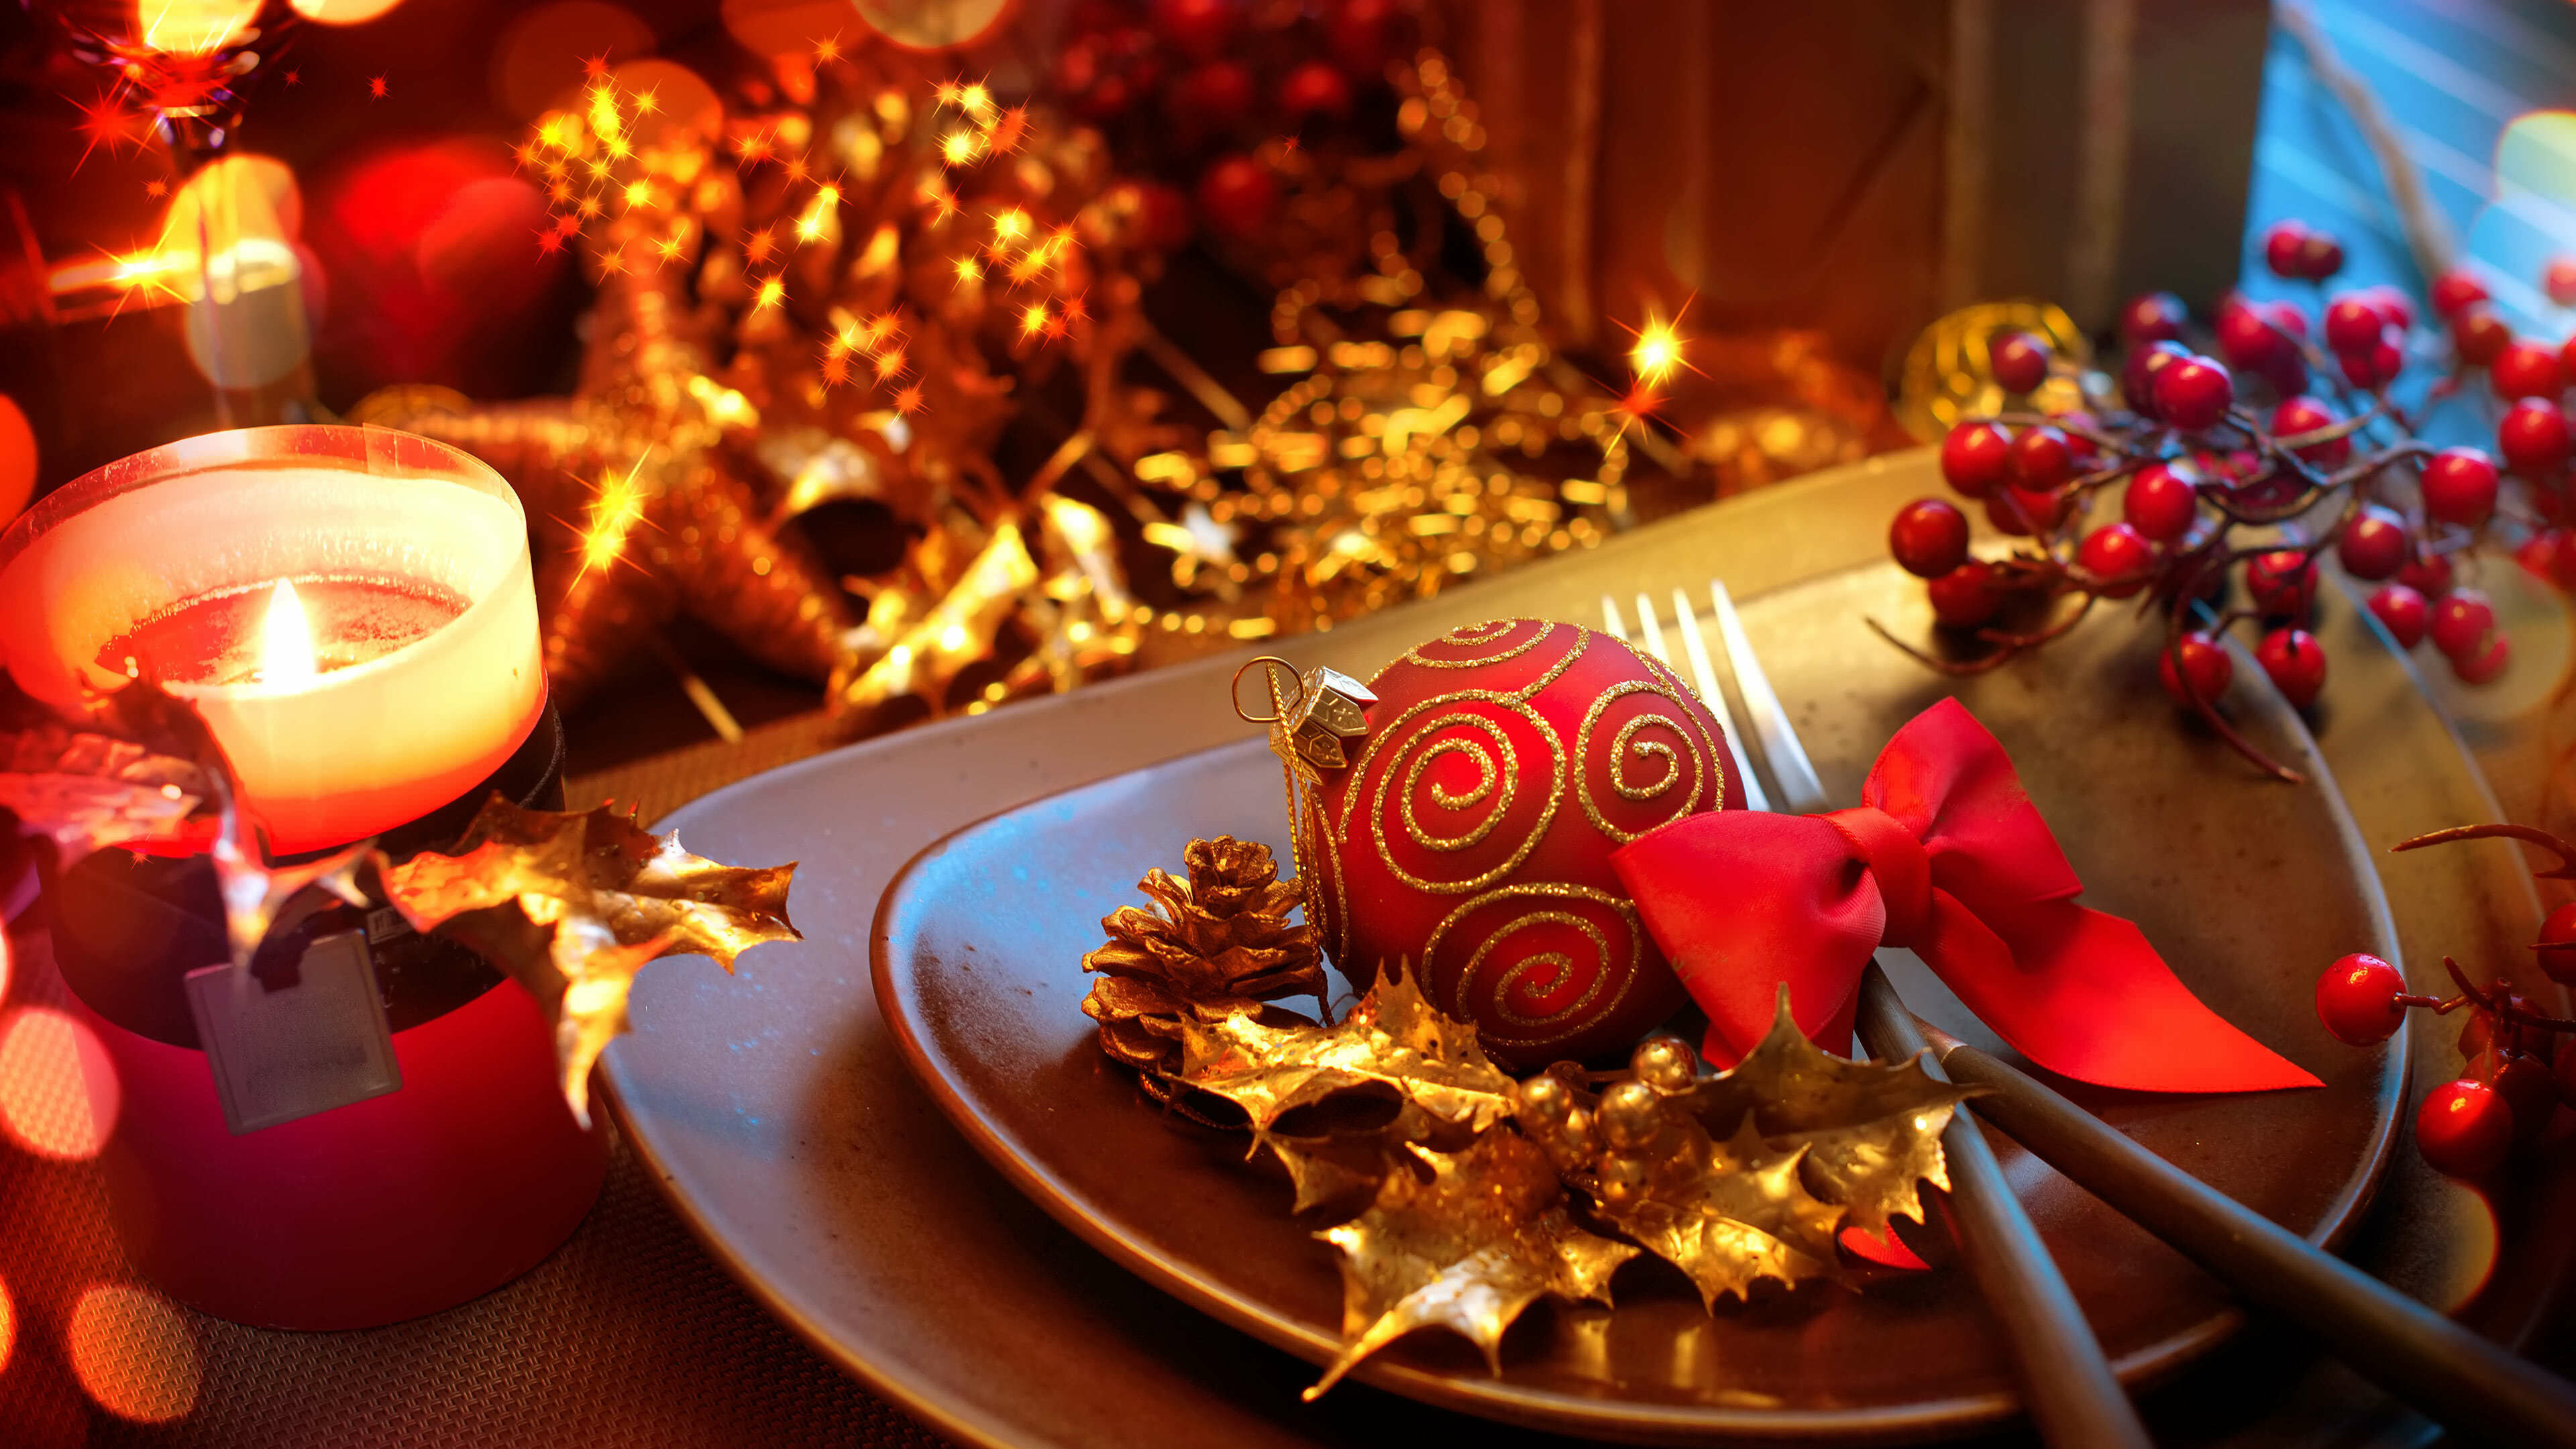 Christmas Ornament: Holiday decorations, Tableware, Candle. 3840x2160 4K Background.